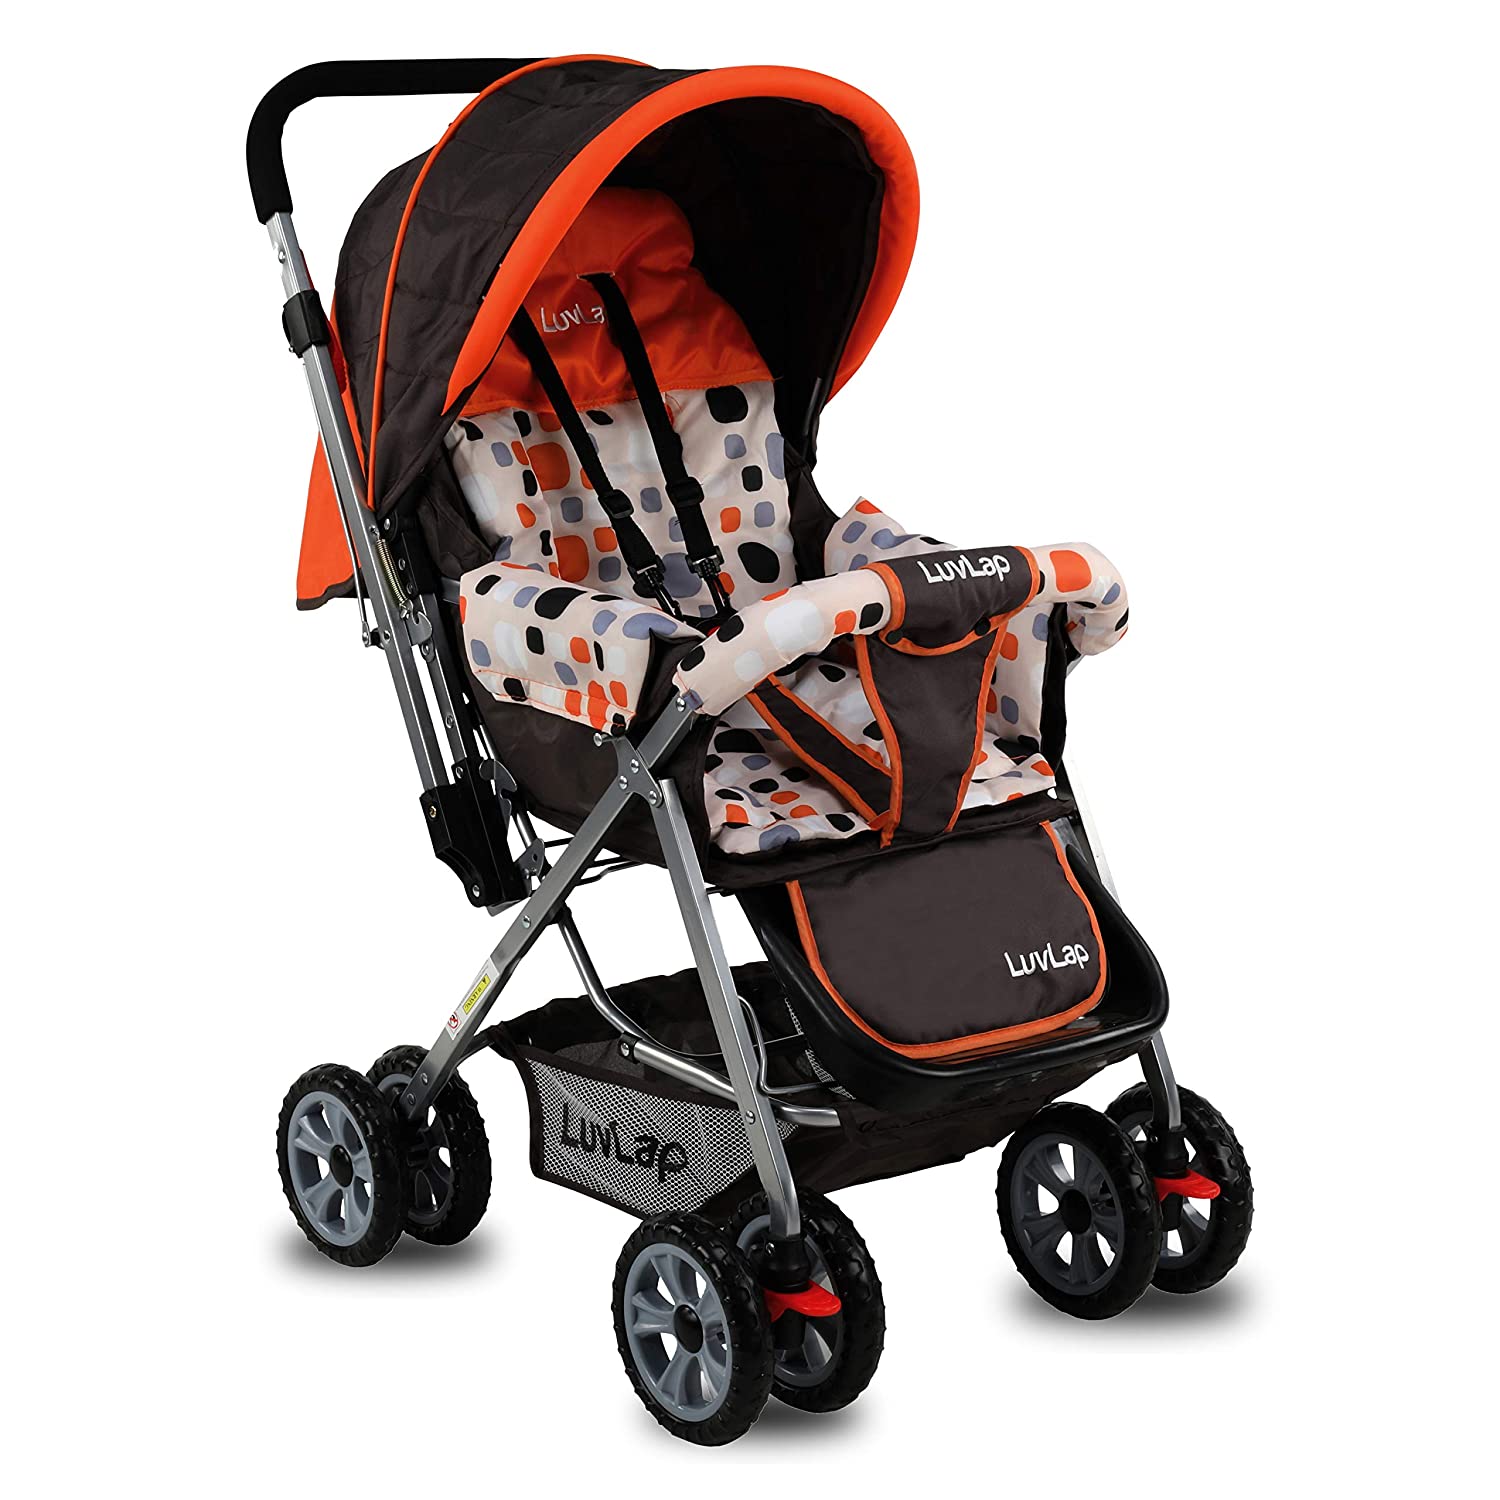 Luvlap Tutti Frutti Stroller/Buggy, Compact & Travel Friendly, for